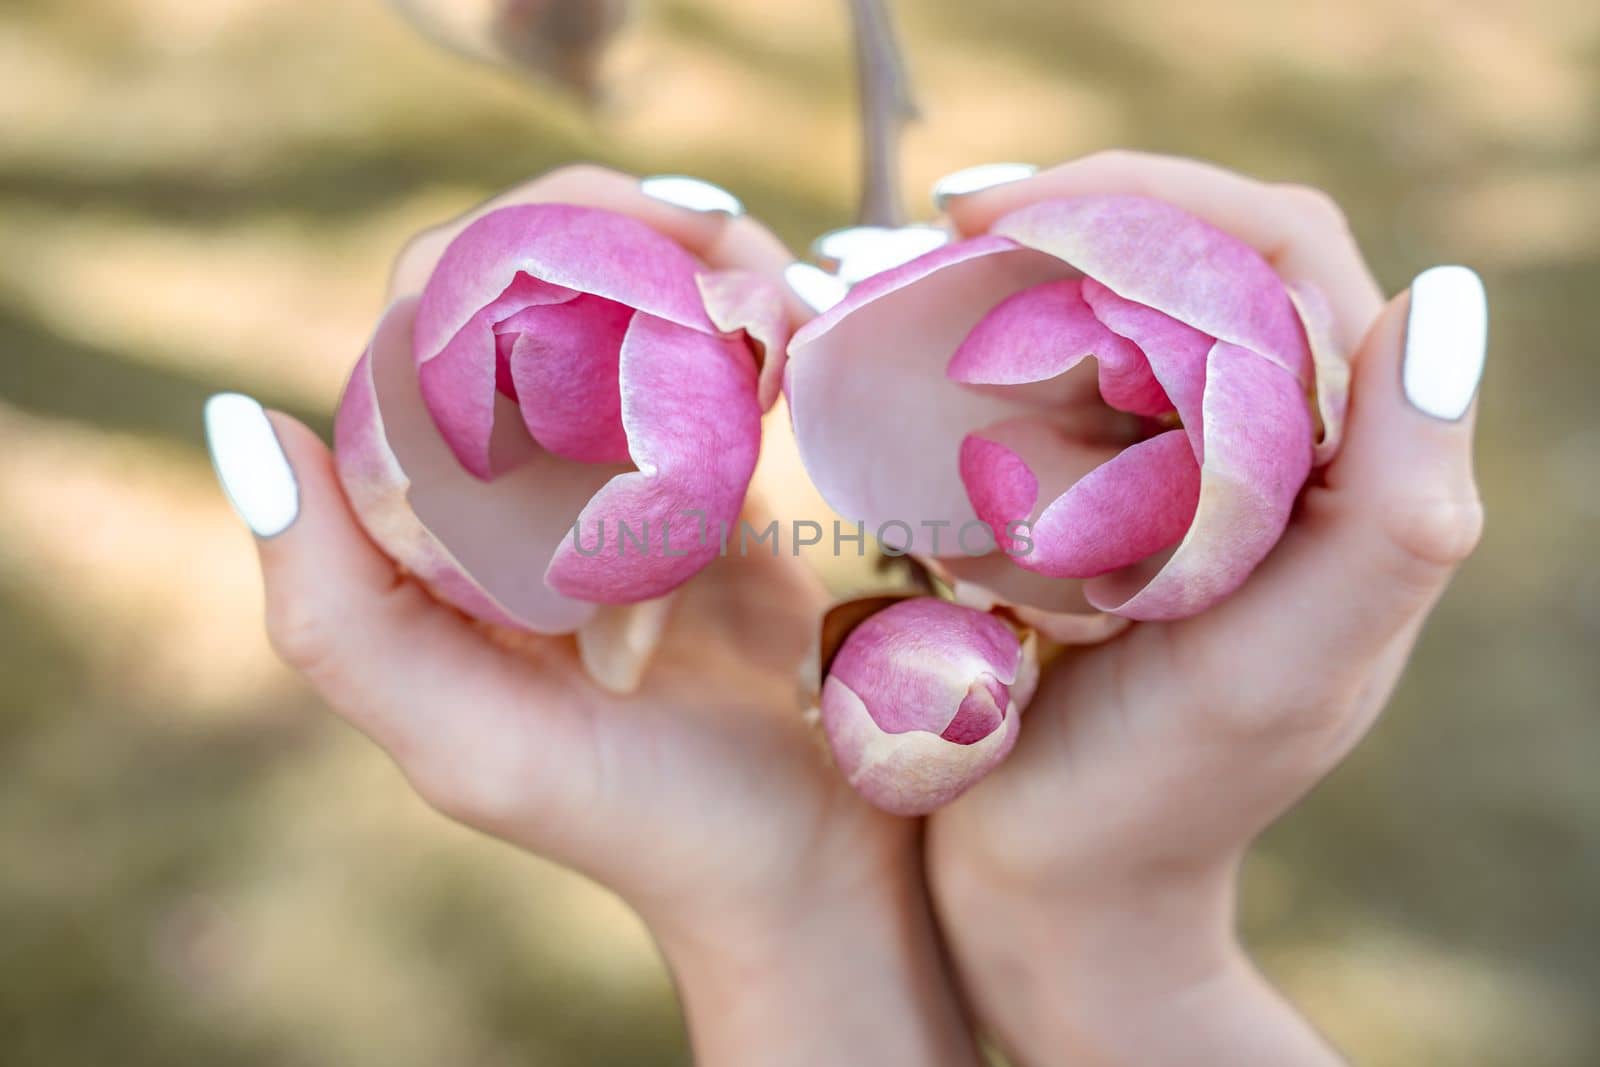 Magnolia woman hands. Girl holding blooming magnolia flowers in the park in spring.